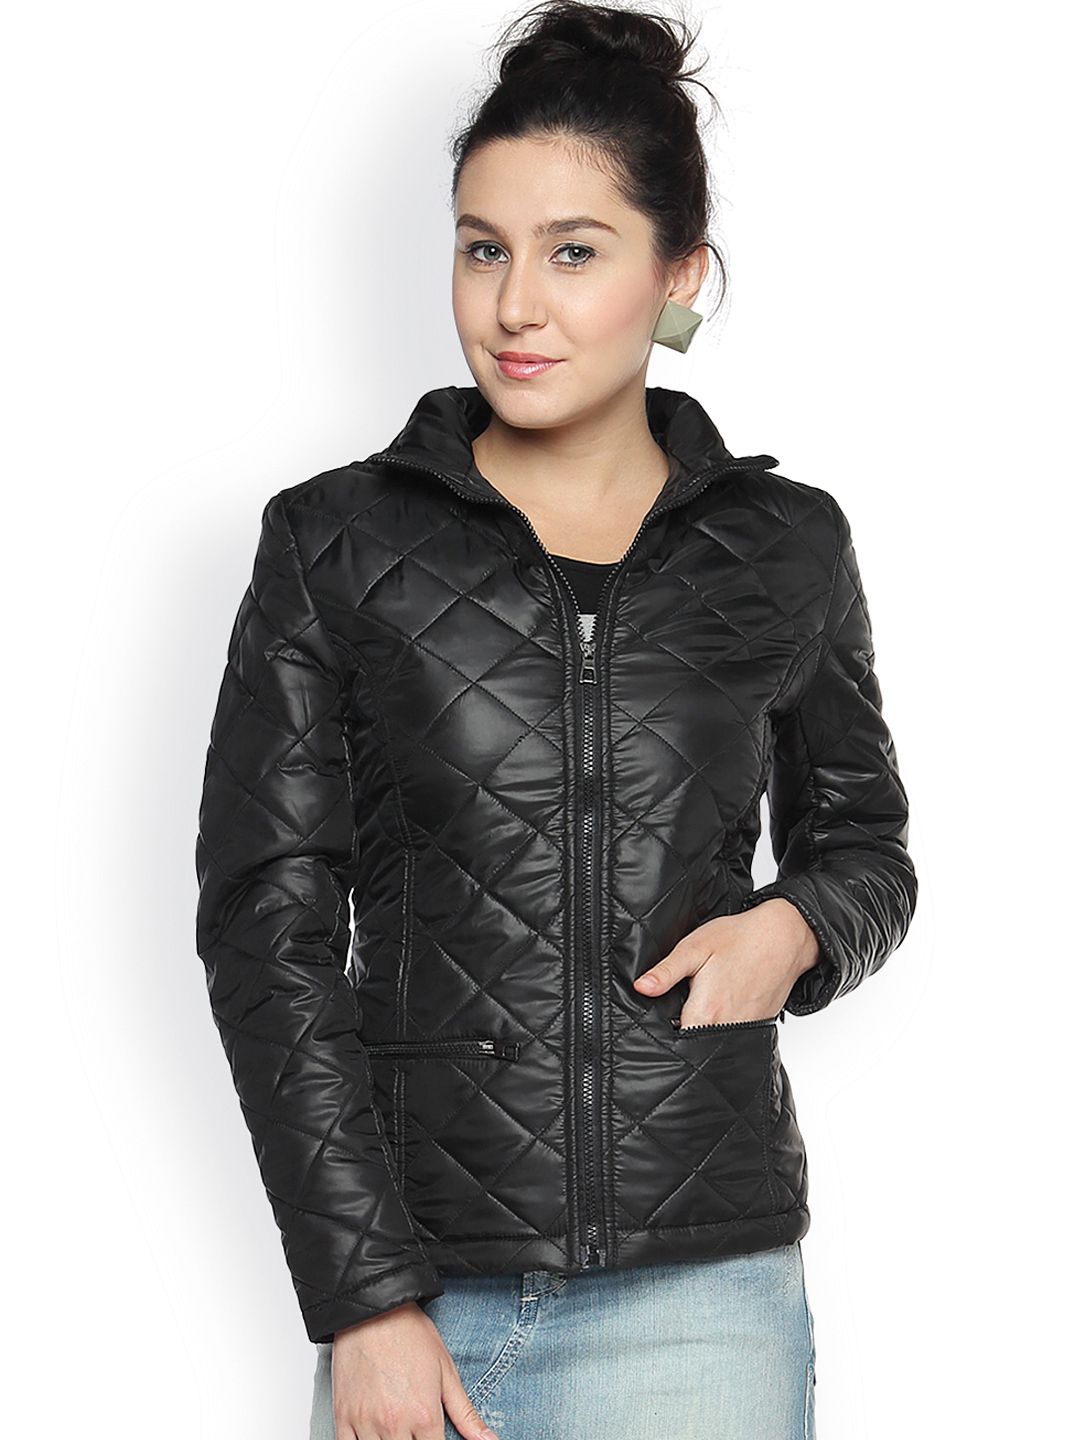 Campus Sutra Women Black Thermal Bomber Jacket Price in India